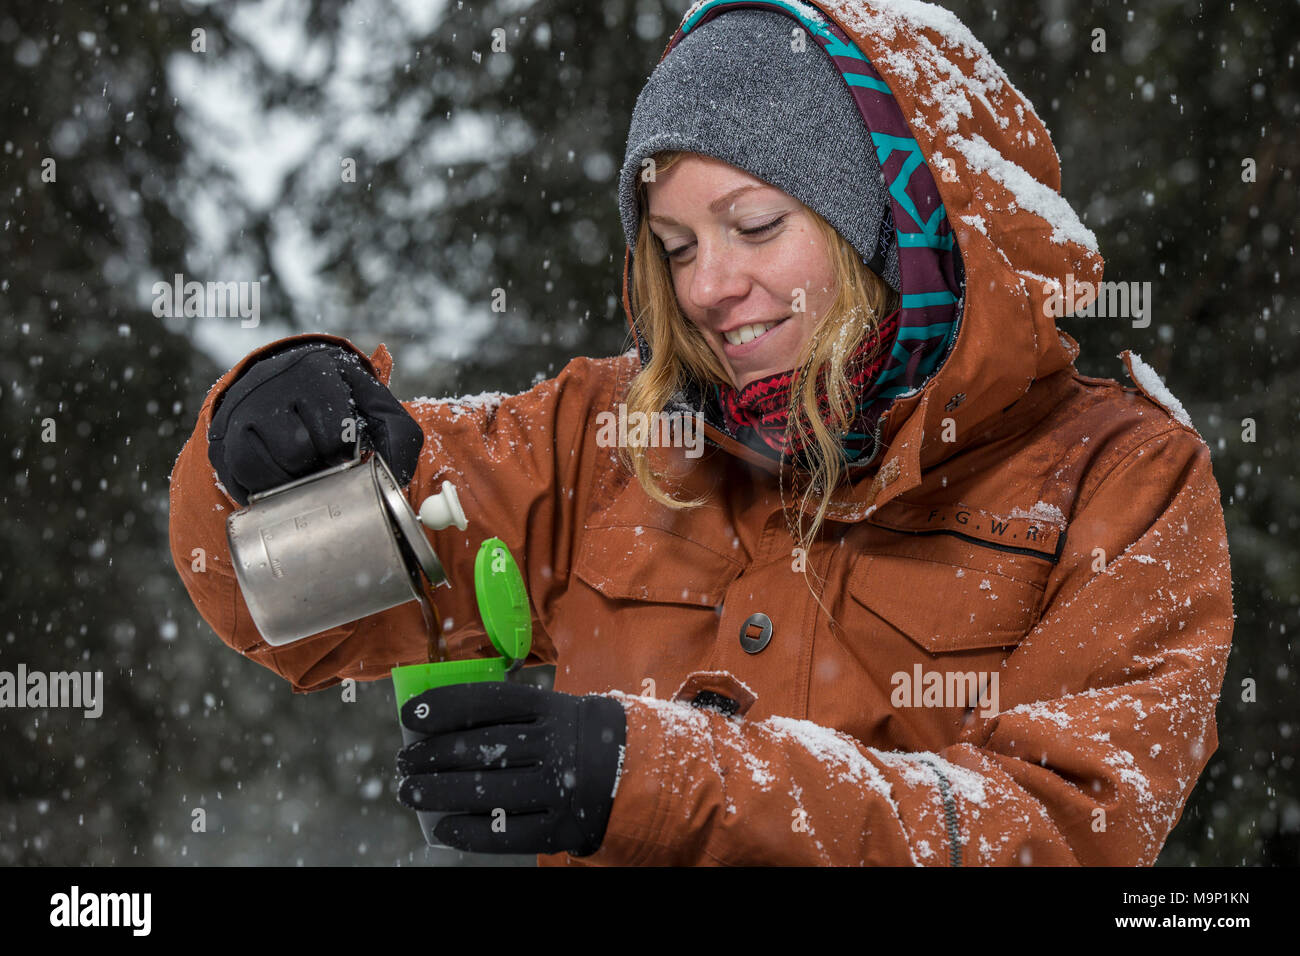 Woman pouring coffee made on camping stove into cup in winter, Sureanu, Romania Stock Photo